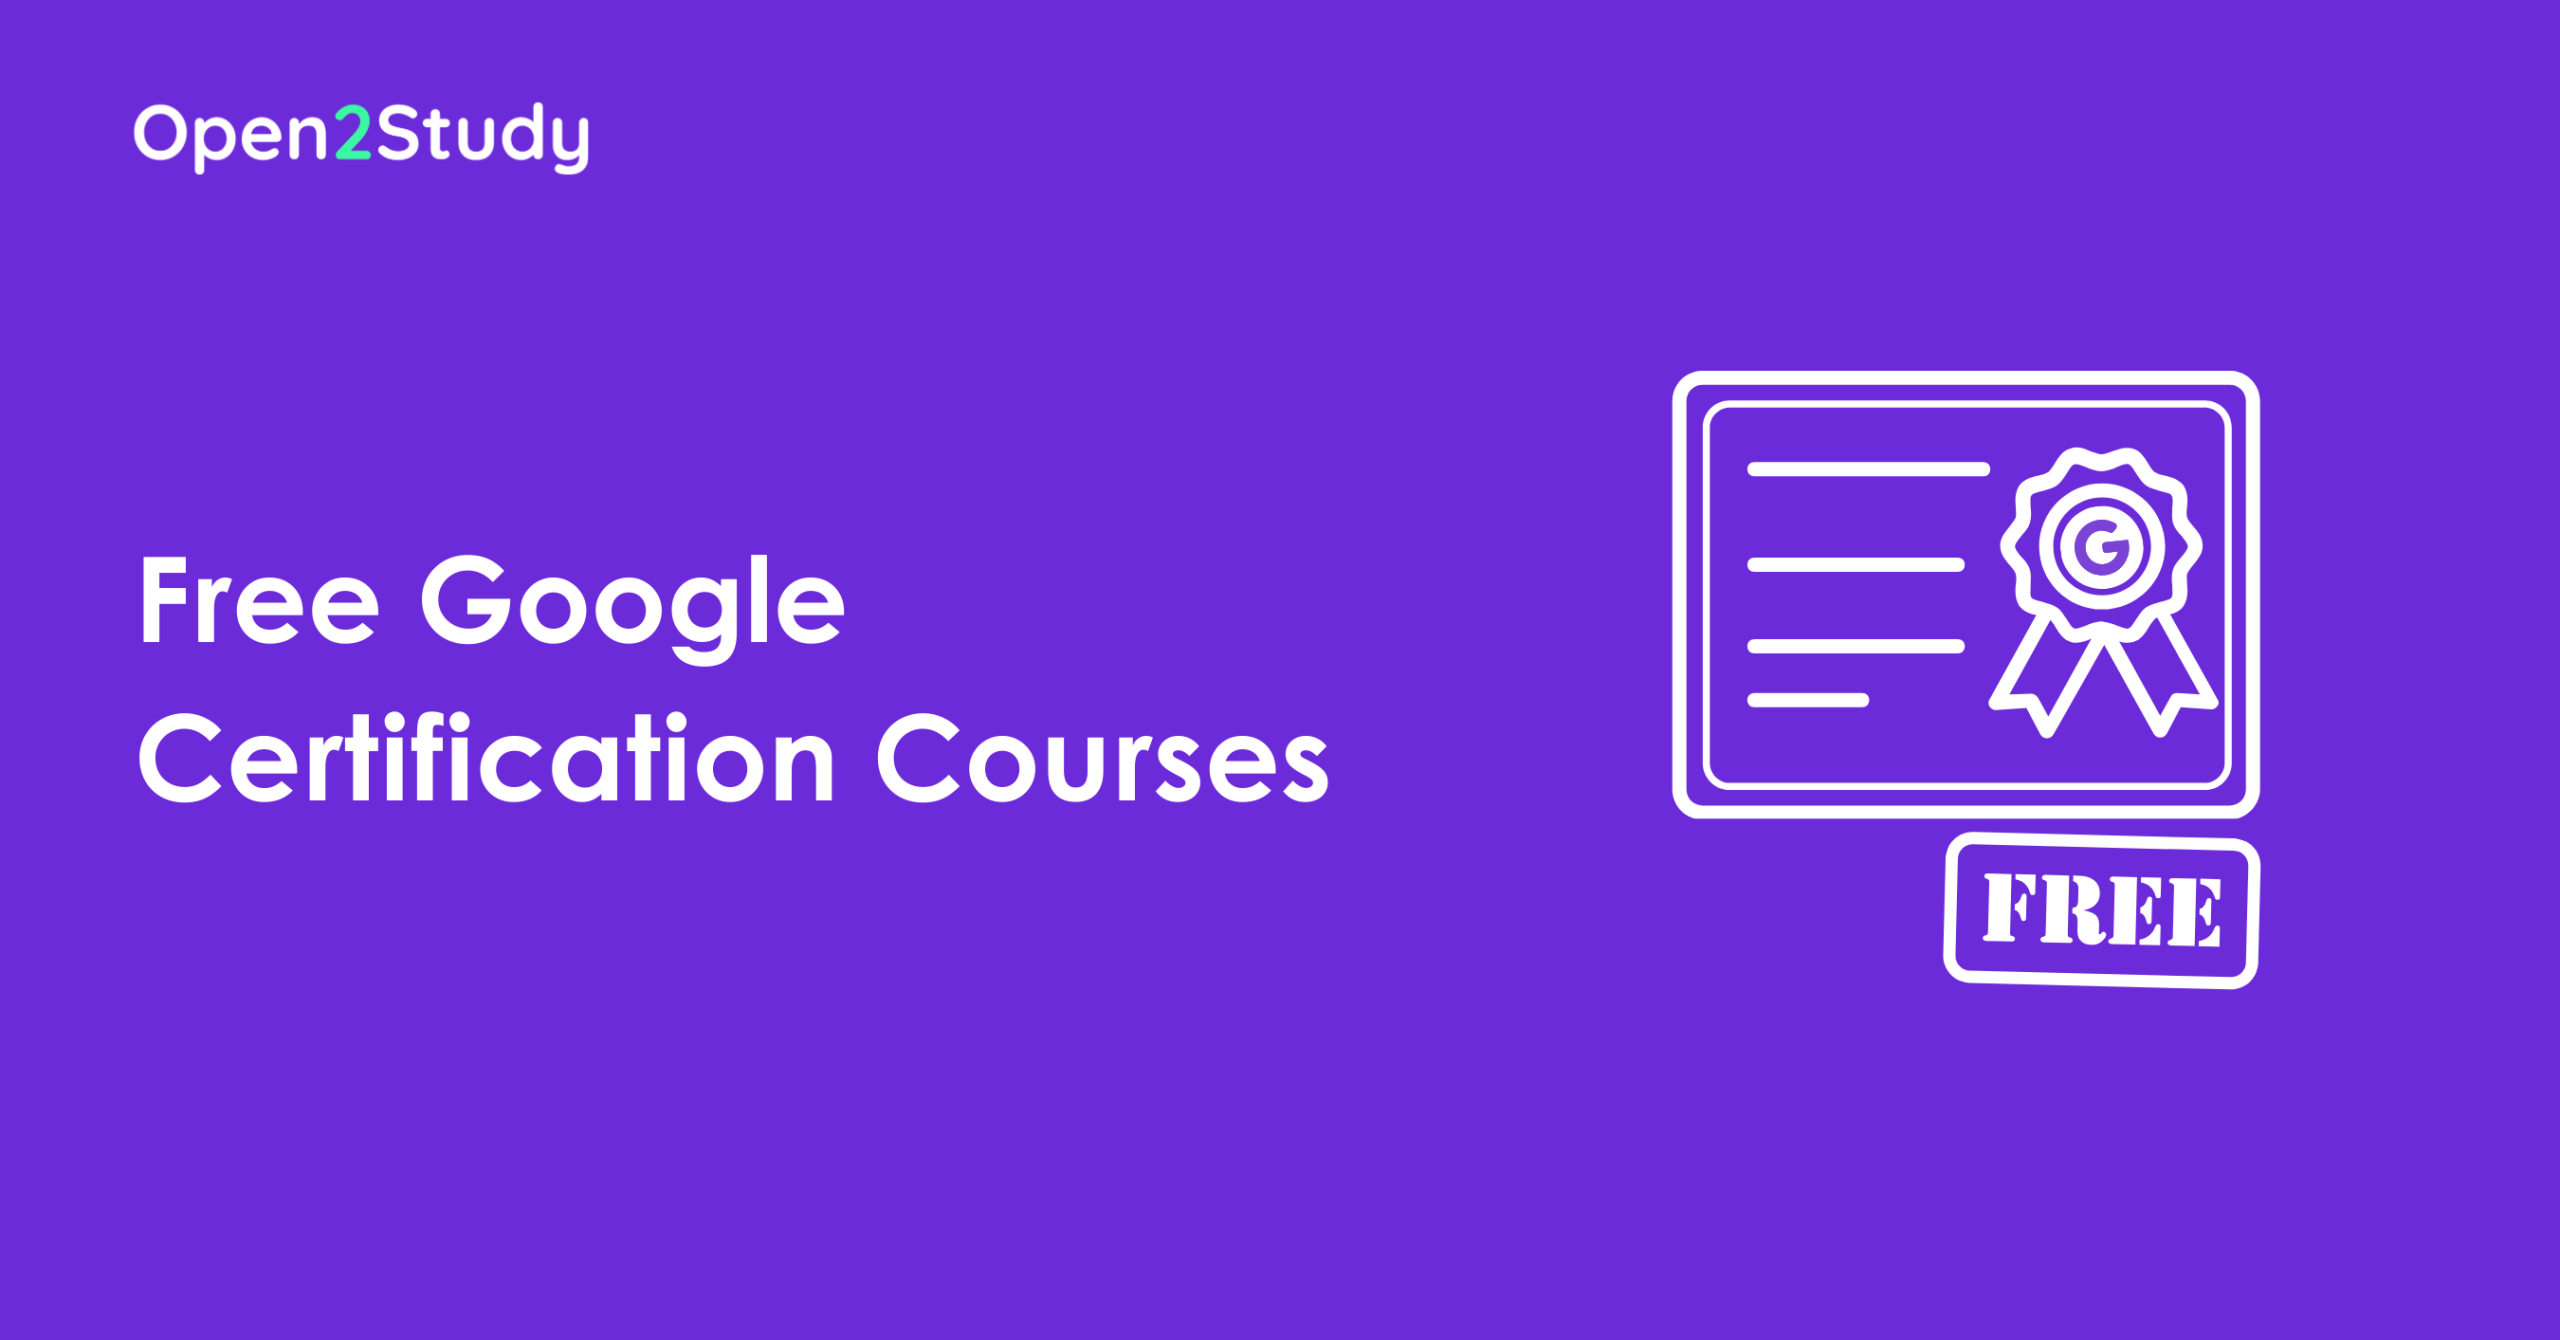 Free Google Certification Courses